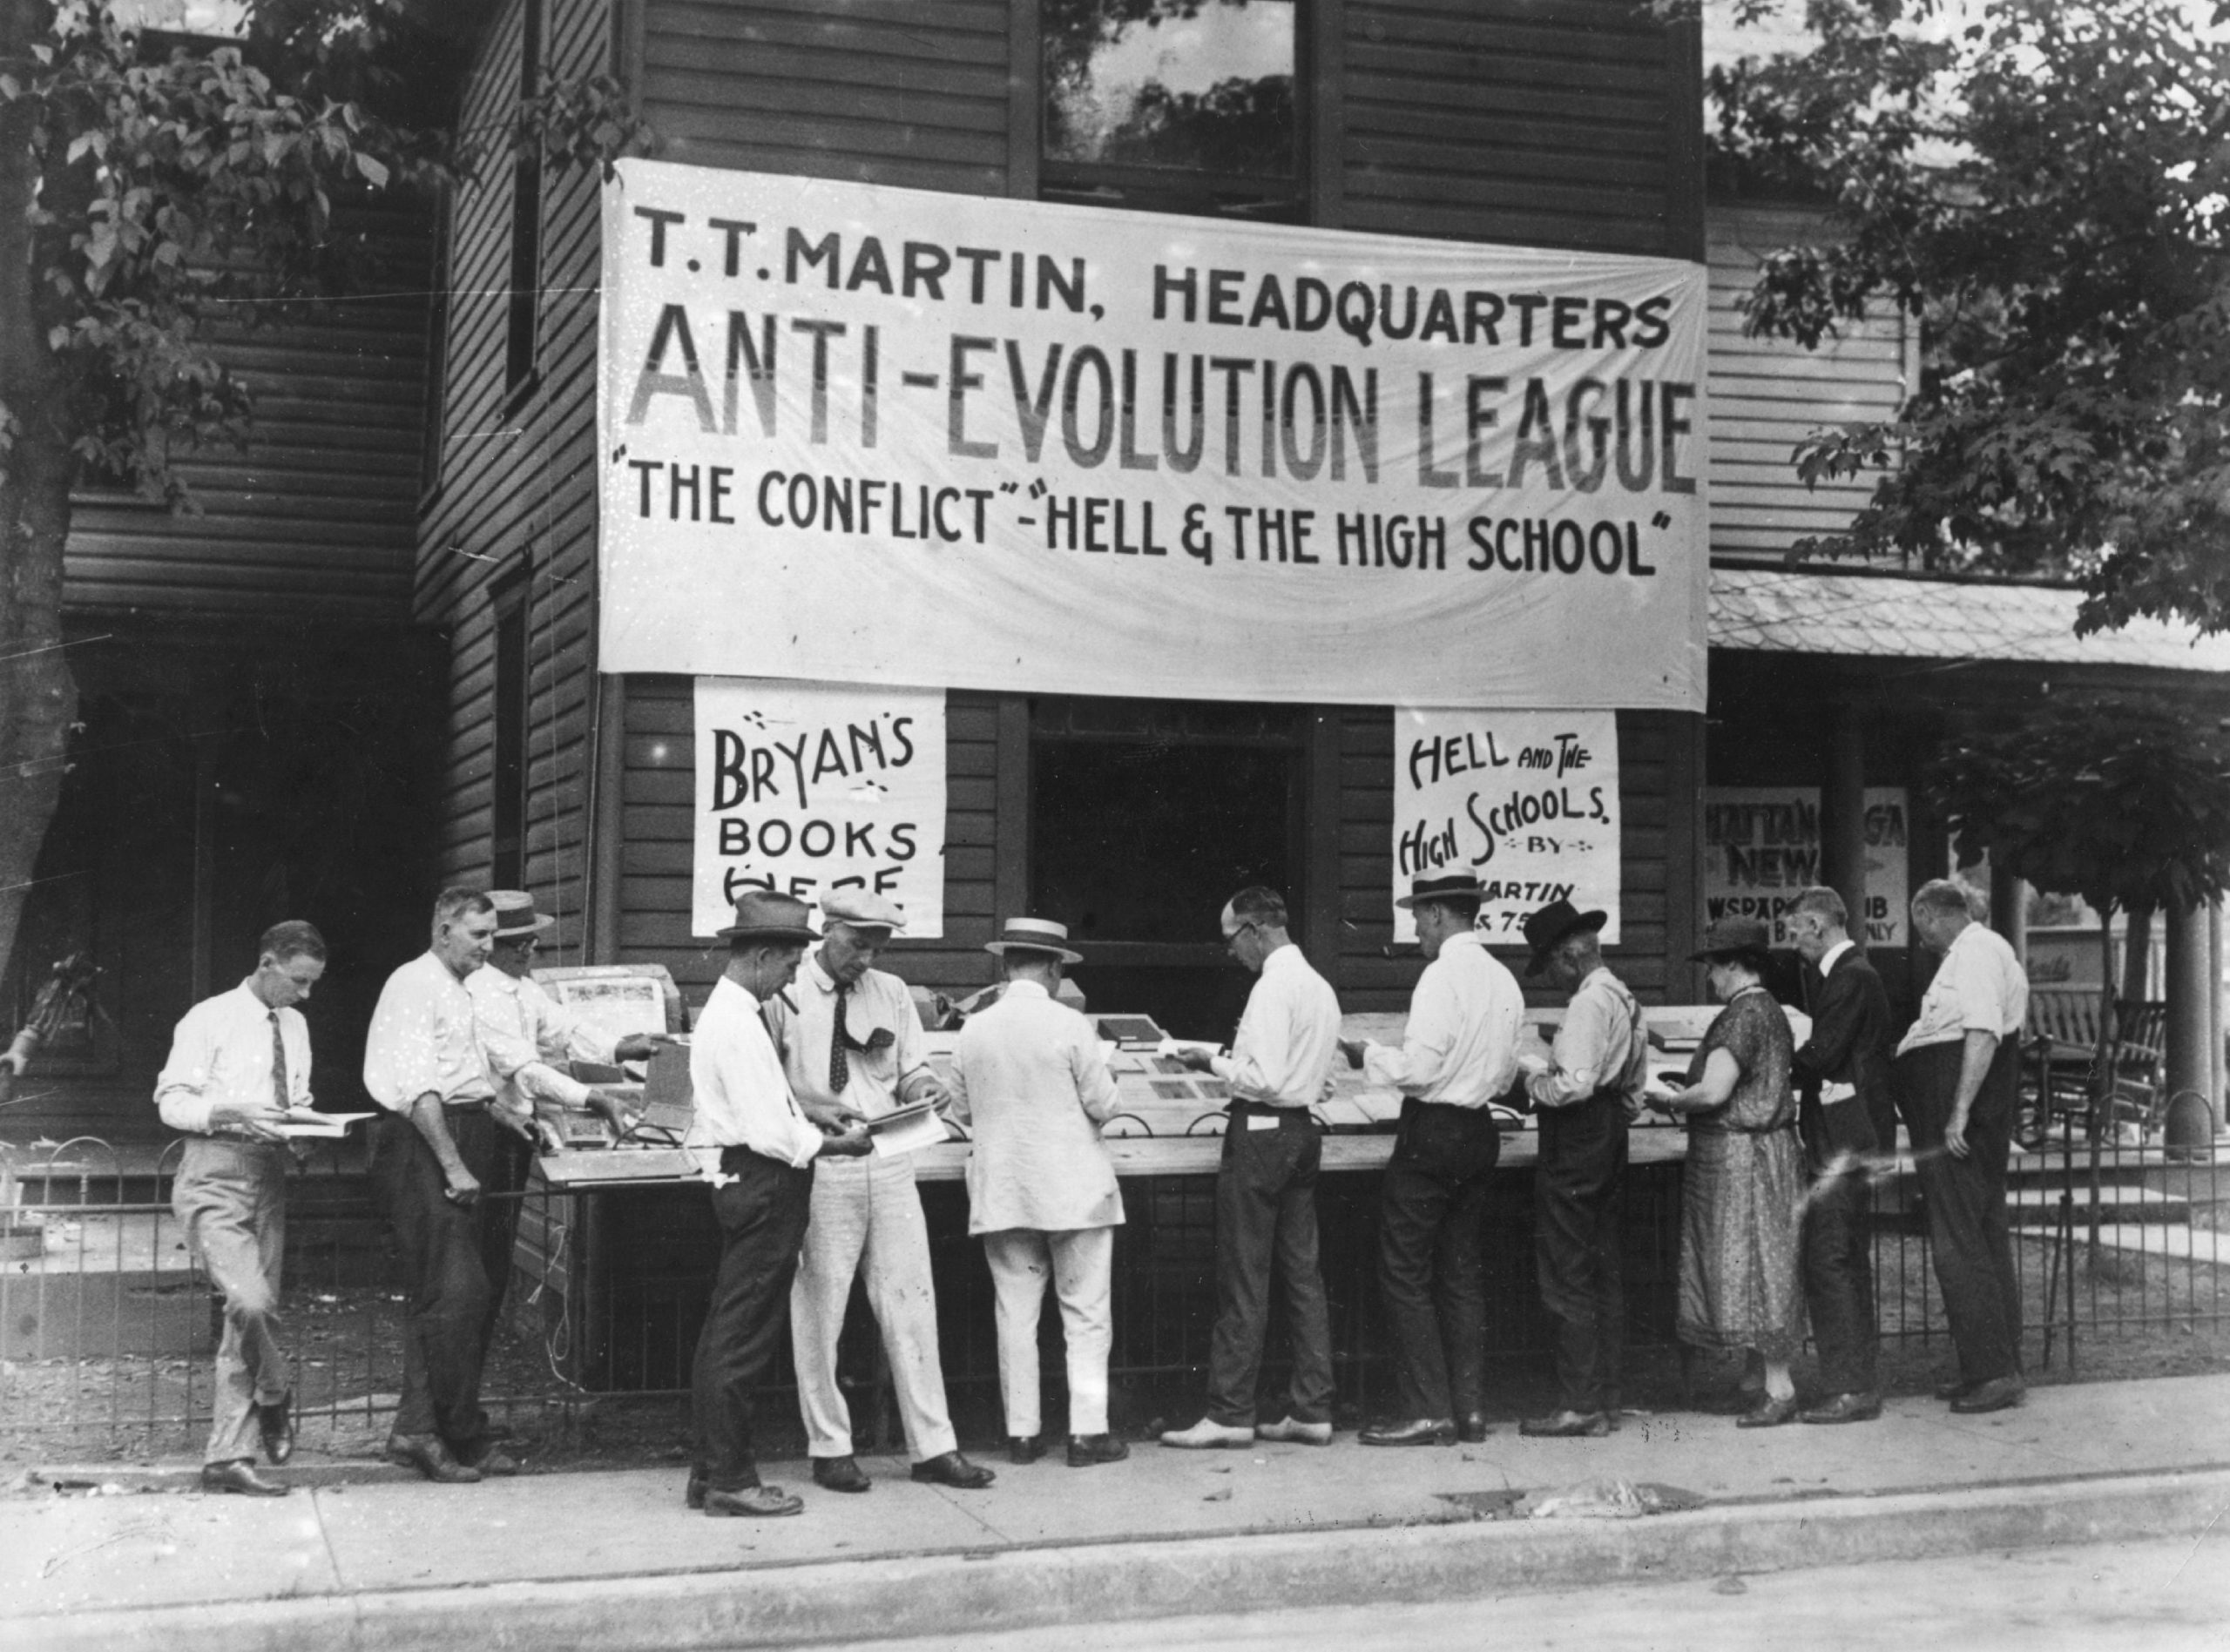 Anti-evolution books being sold in Dayton, Tennessee, where the Scopes trial happened. (Photo: Topical Press Agency, Getty Images)